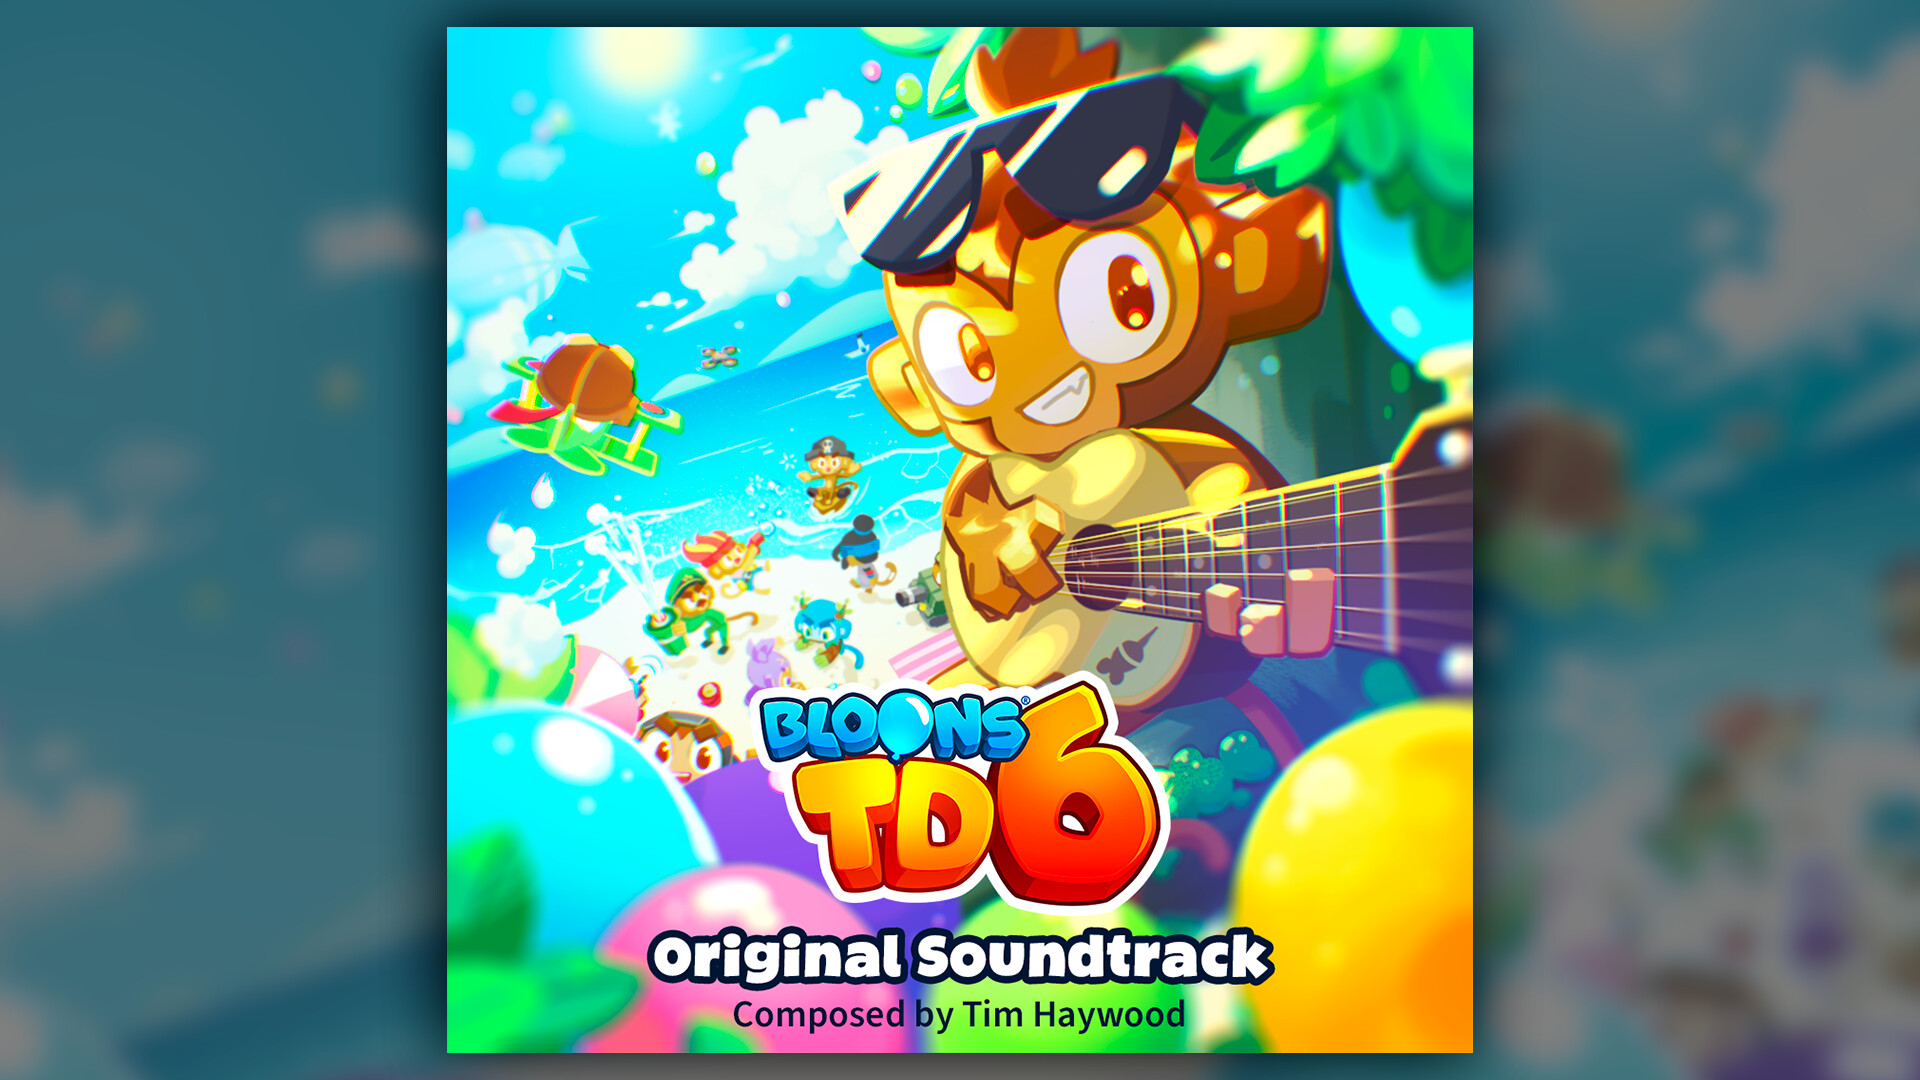 Bloons TD 6 Soundtrack Featured Screenshot #1